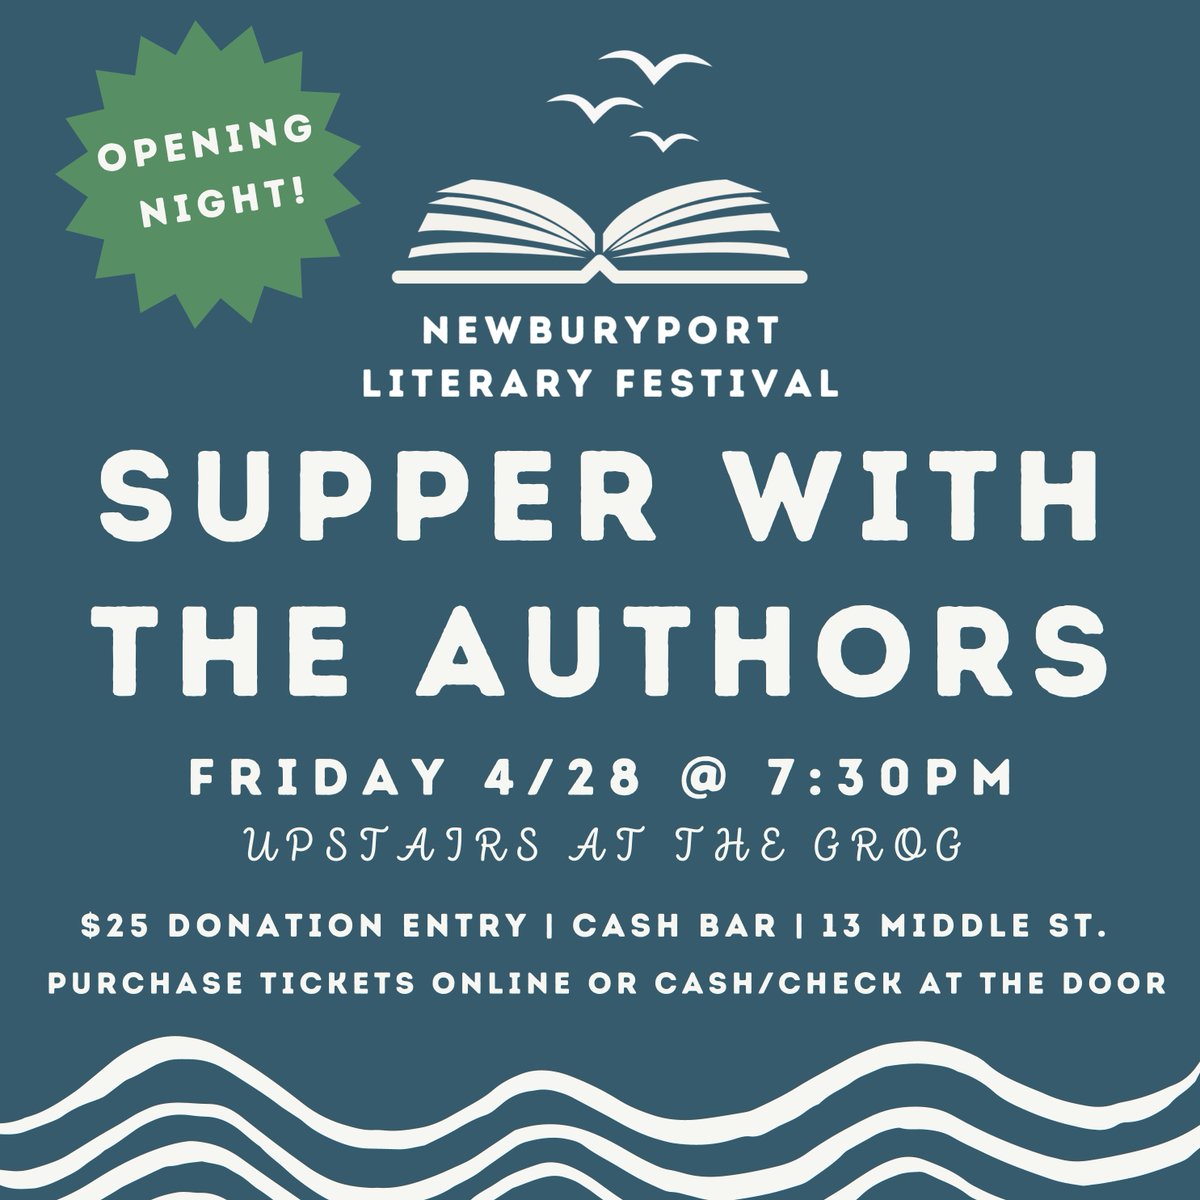 Following the opening event, is supper with the authors. Join us, upstairs The Grog restaurant (13 Middle St.) for a night of fun, light bites and a cash bar. Tickets can be bought ahead of time, online: newburyportliteraryfestival.org/donate/ or with cash/check at the door. See you there!